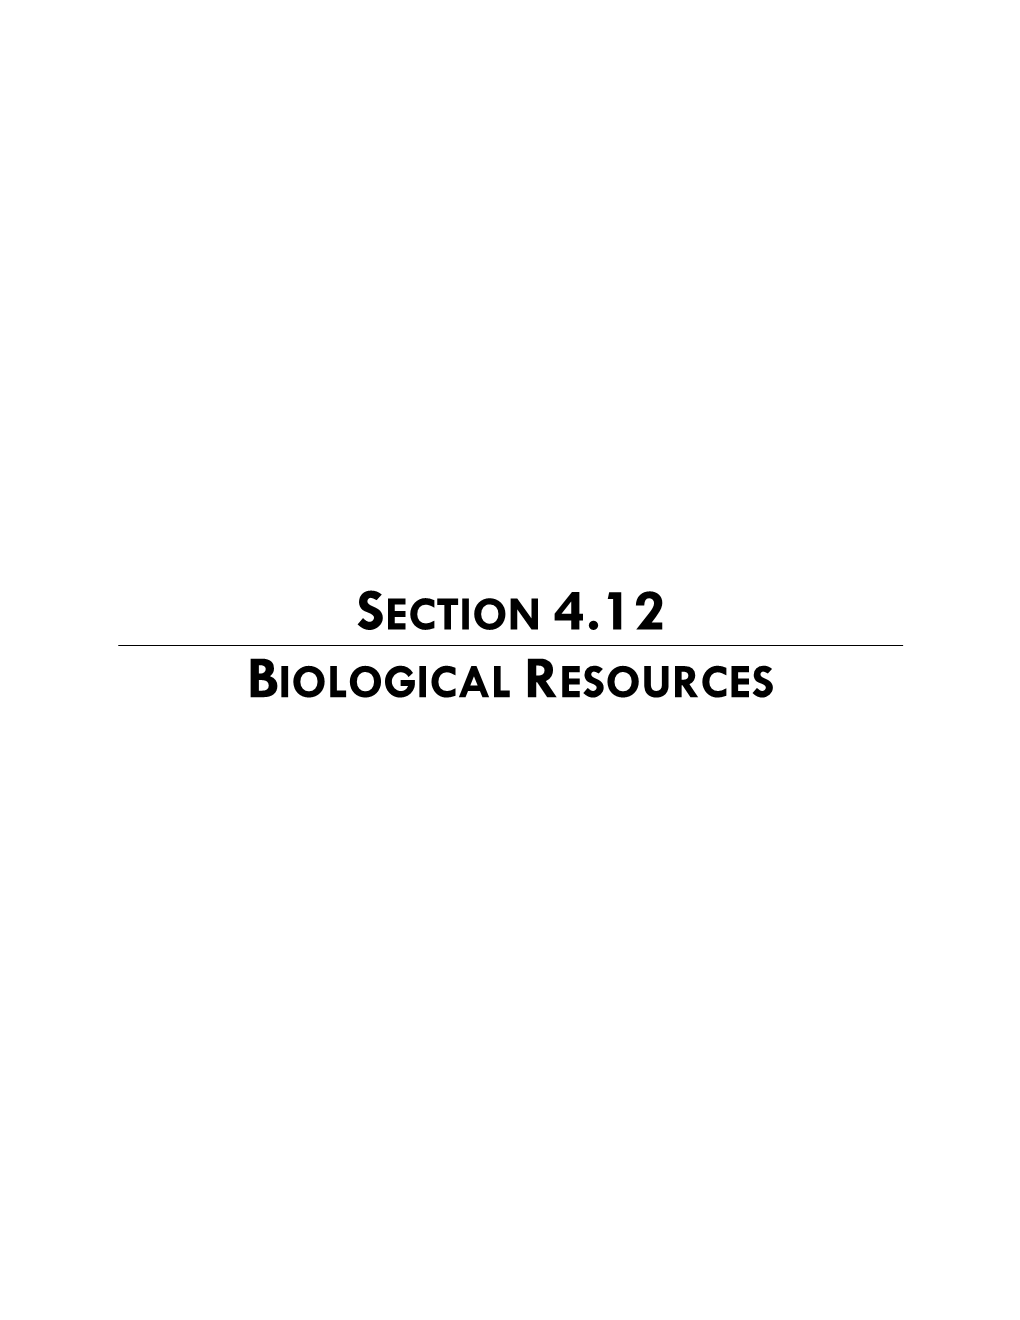 Section 4.12 Biological Resources